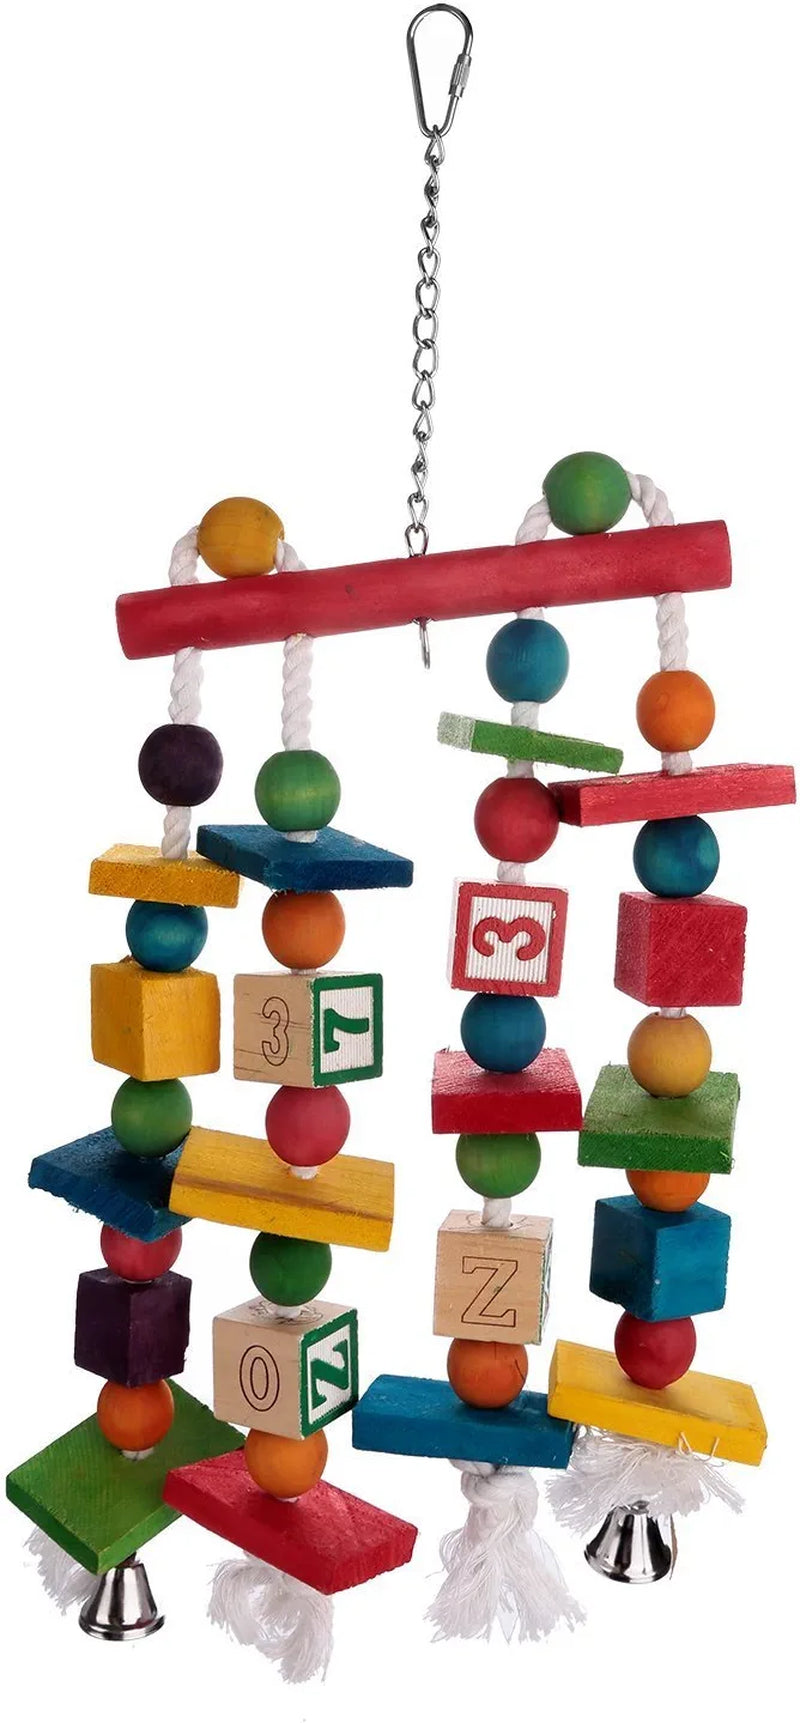 Aigou Knots Block Chewing Bird Toys with Bells Hanging Parrot Toys 17.5" by 6.5"